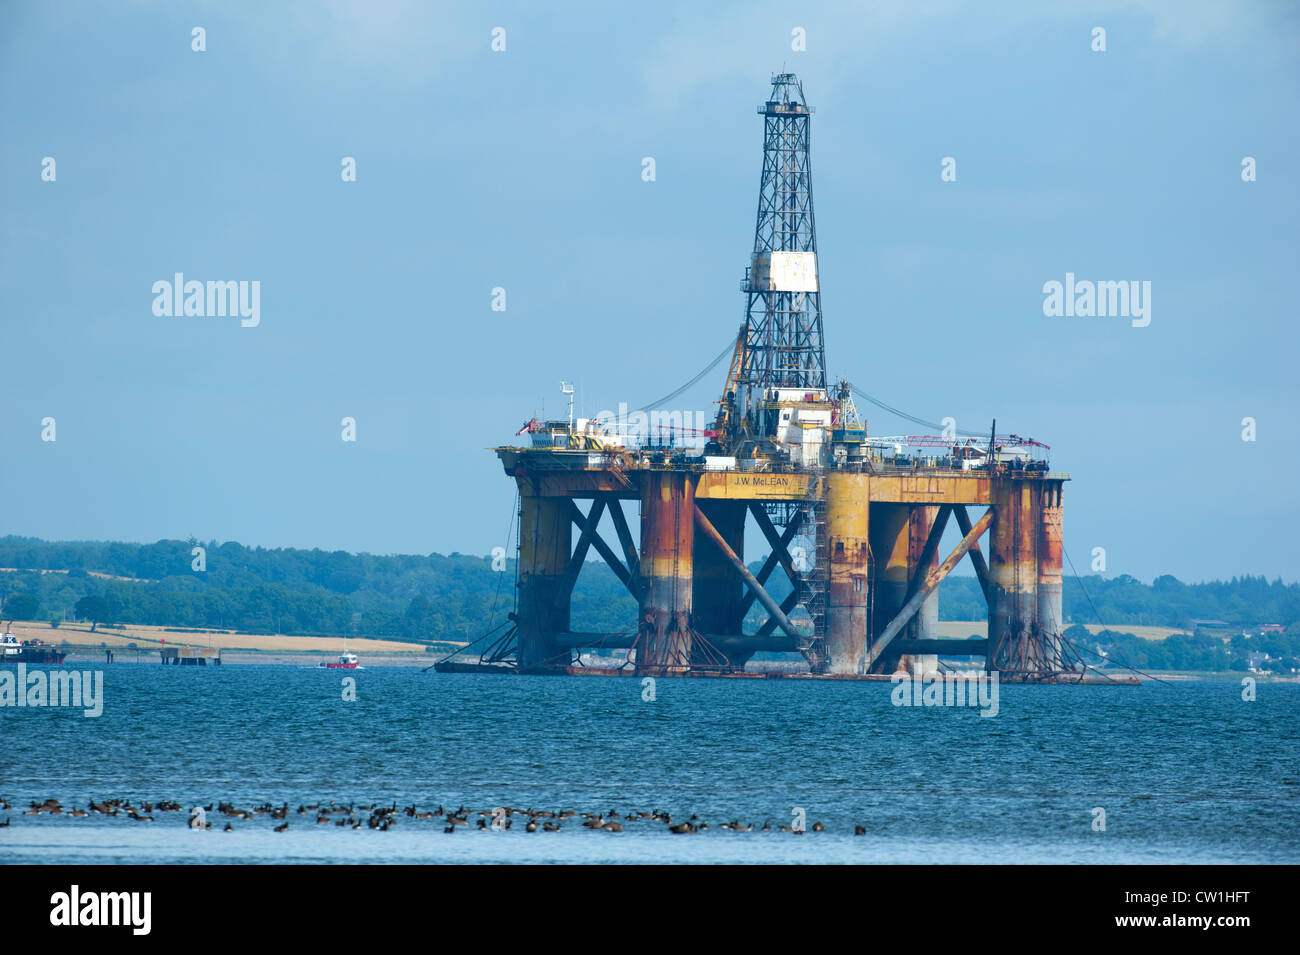 Oil Rig JW McLean, operated by Transocean, being serviced in the Cromarty Firth.  SCO 8283 Stock Photo